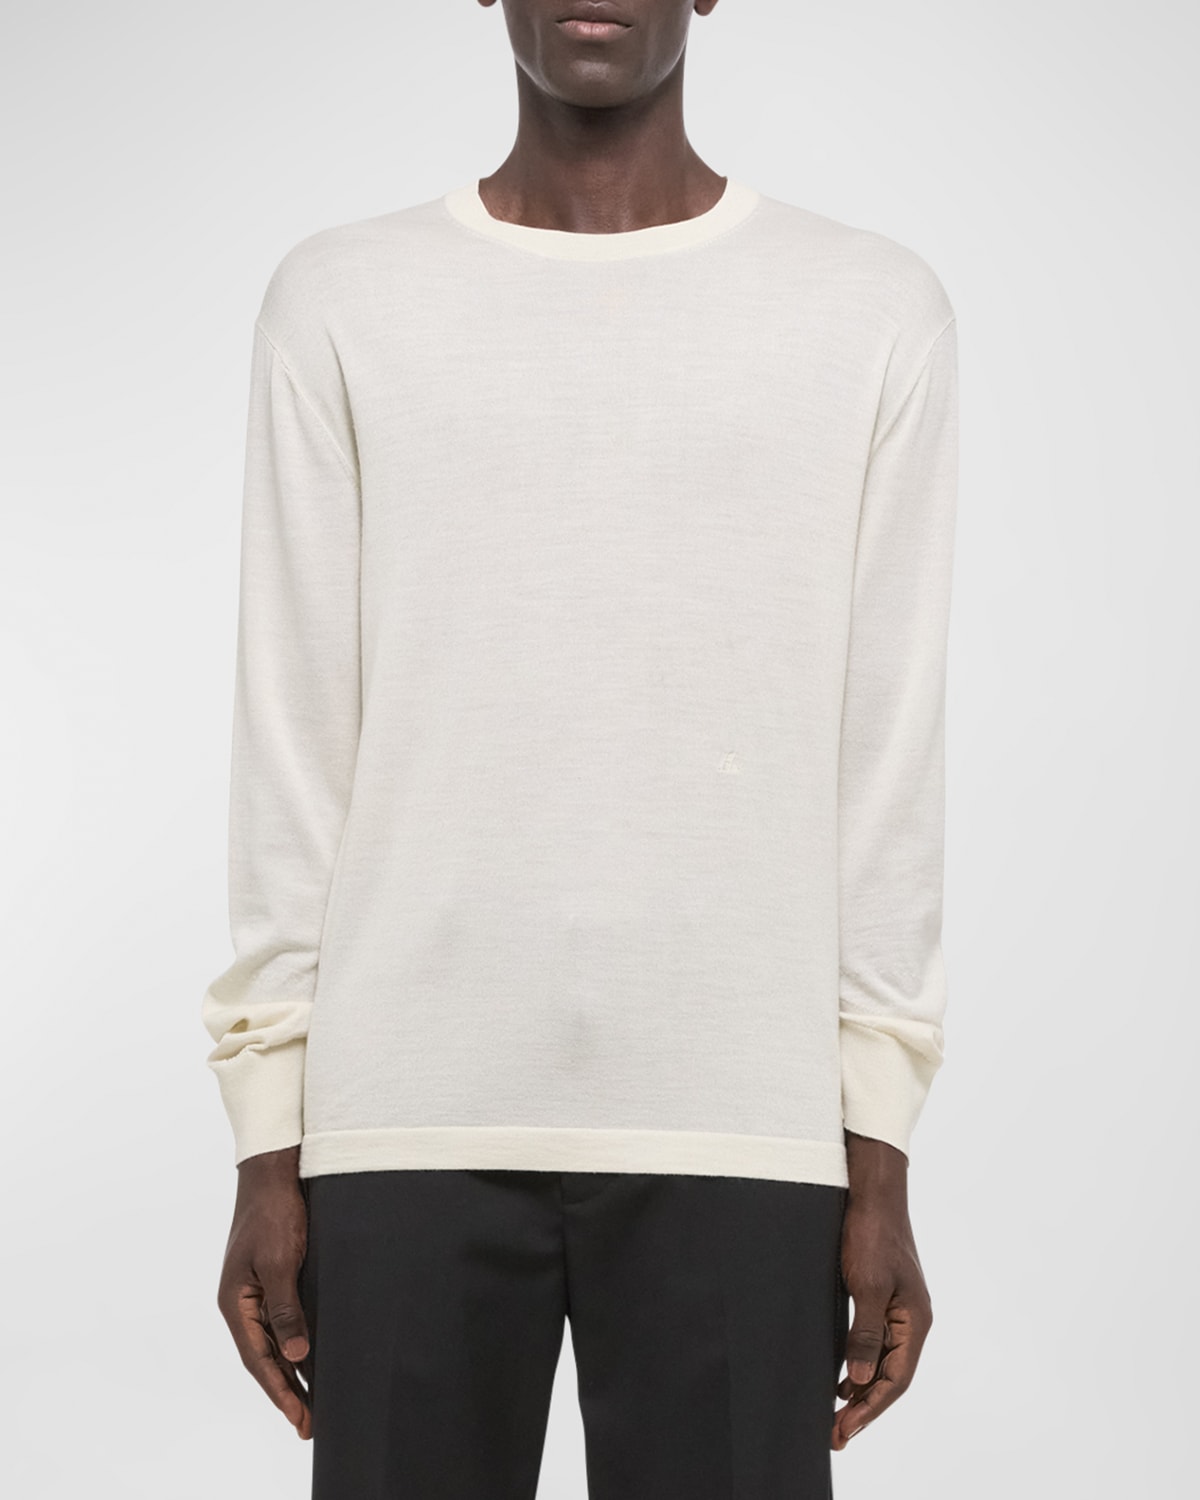 Men's Sweater with Curved Sleeves